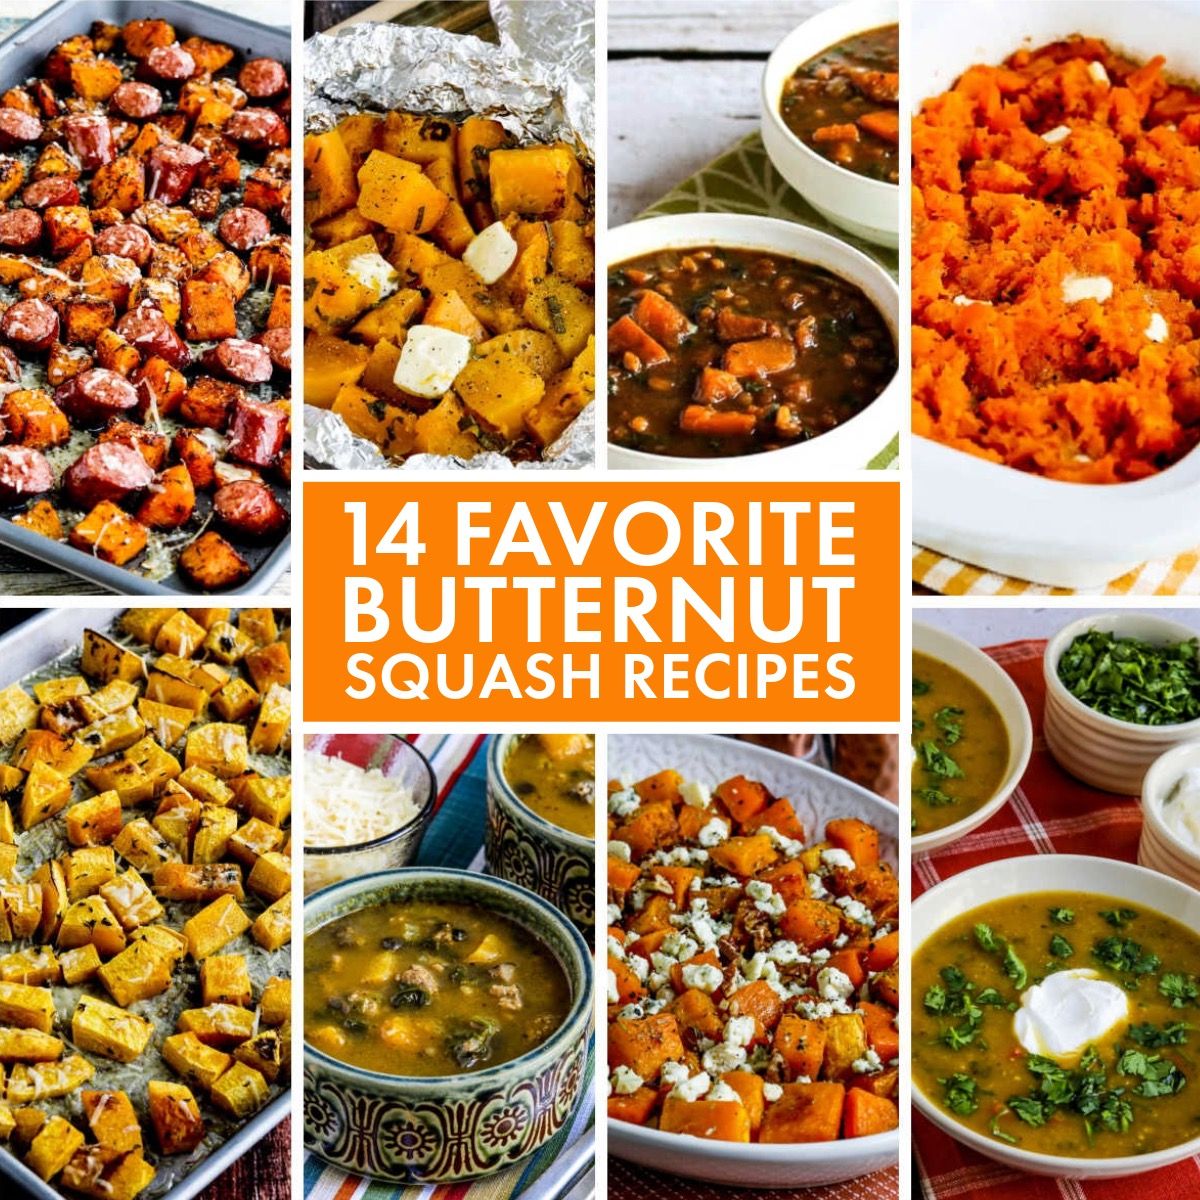 14 Favorite Butternut Squash Recipes collage with text overlay showing featured recipes.